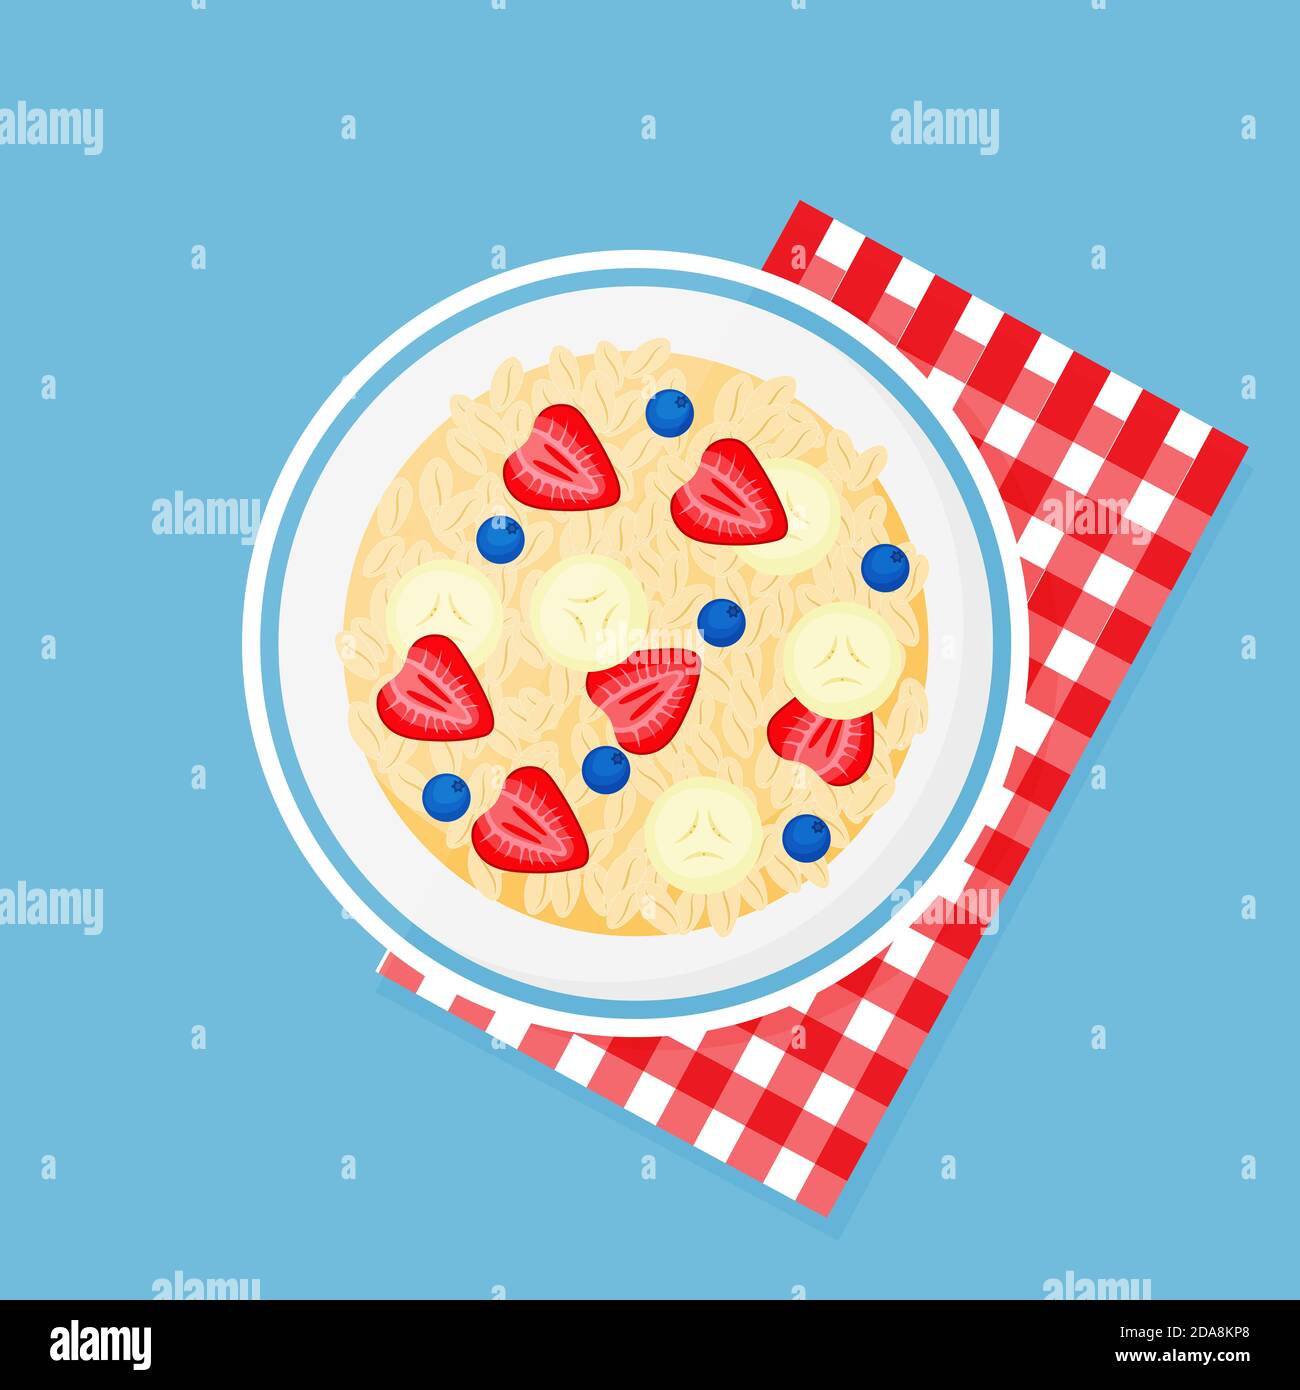 Granola, banana, strawberries, blueberries in bowl on a red checkered napkin. Muesli fruits healthy natural breakfast. Healthy food, oat flakes Stock Vector